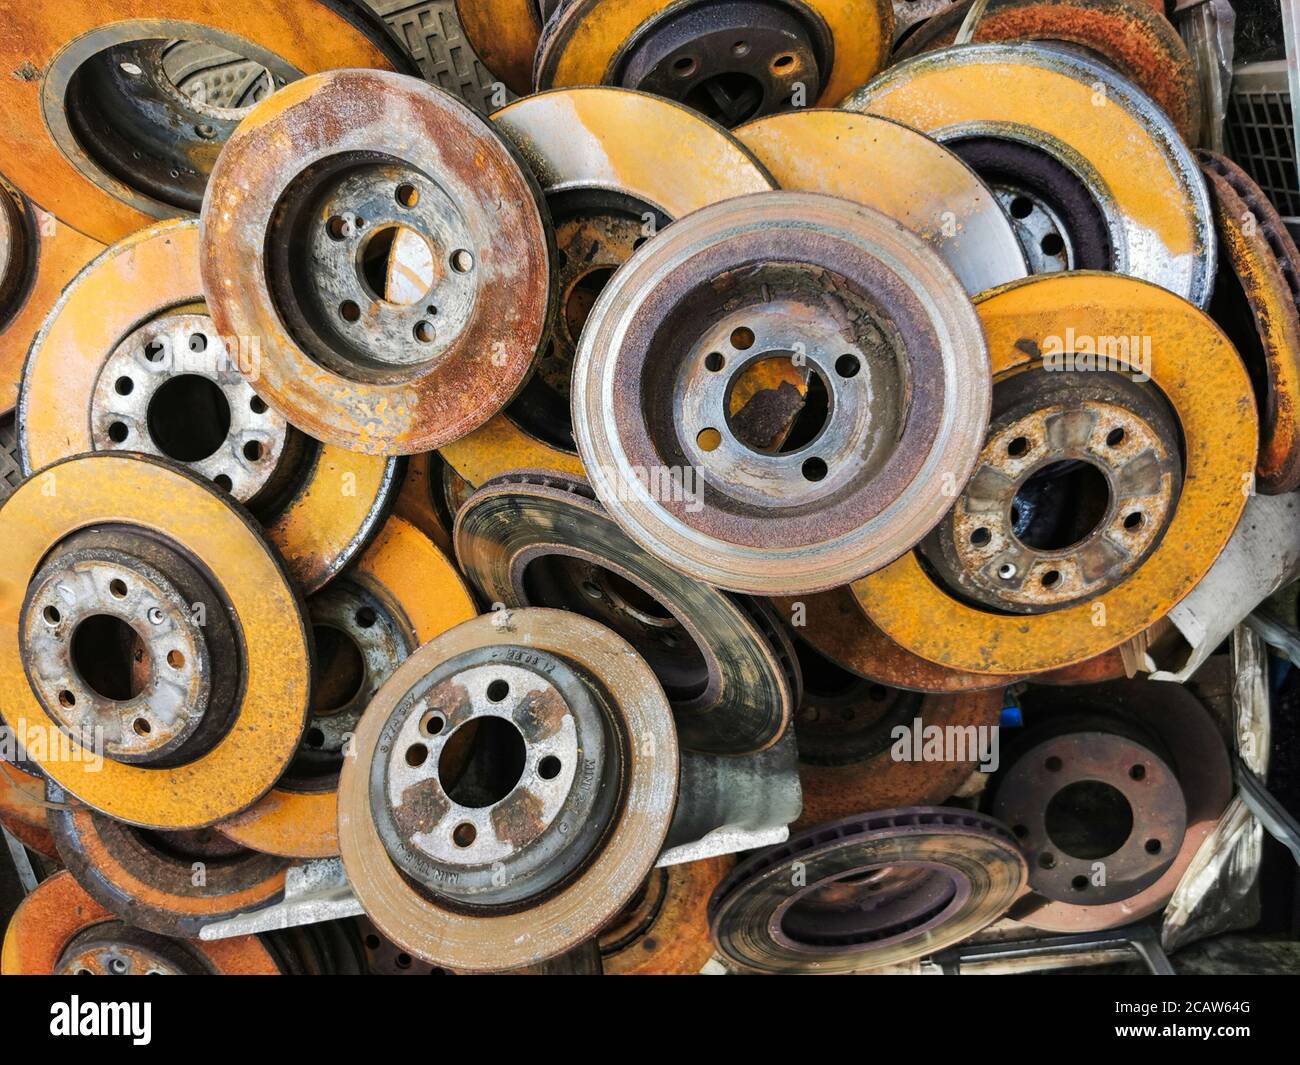 Used rusty car brake discs in a bin ready for recycling. Metal recycle and reuse is one of the main challenges of the modern world. Stock Photo